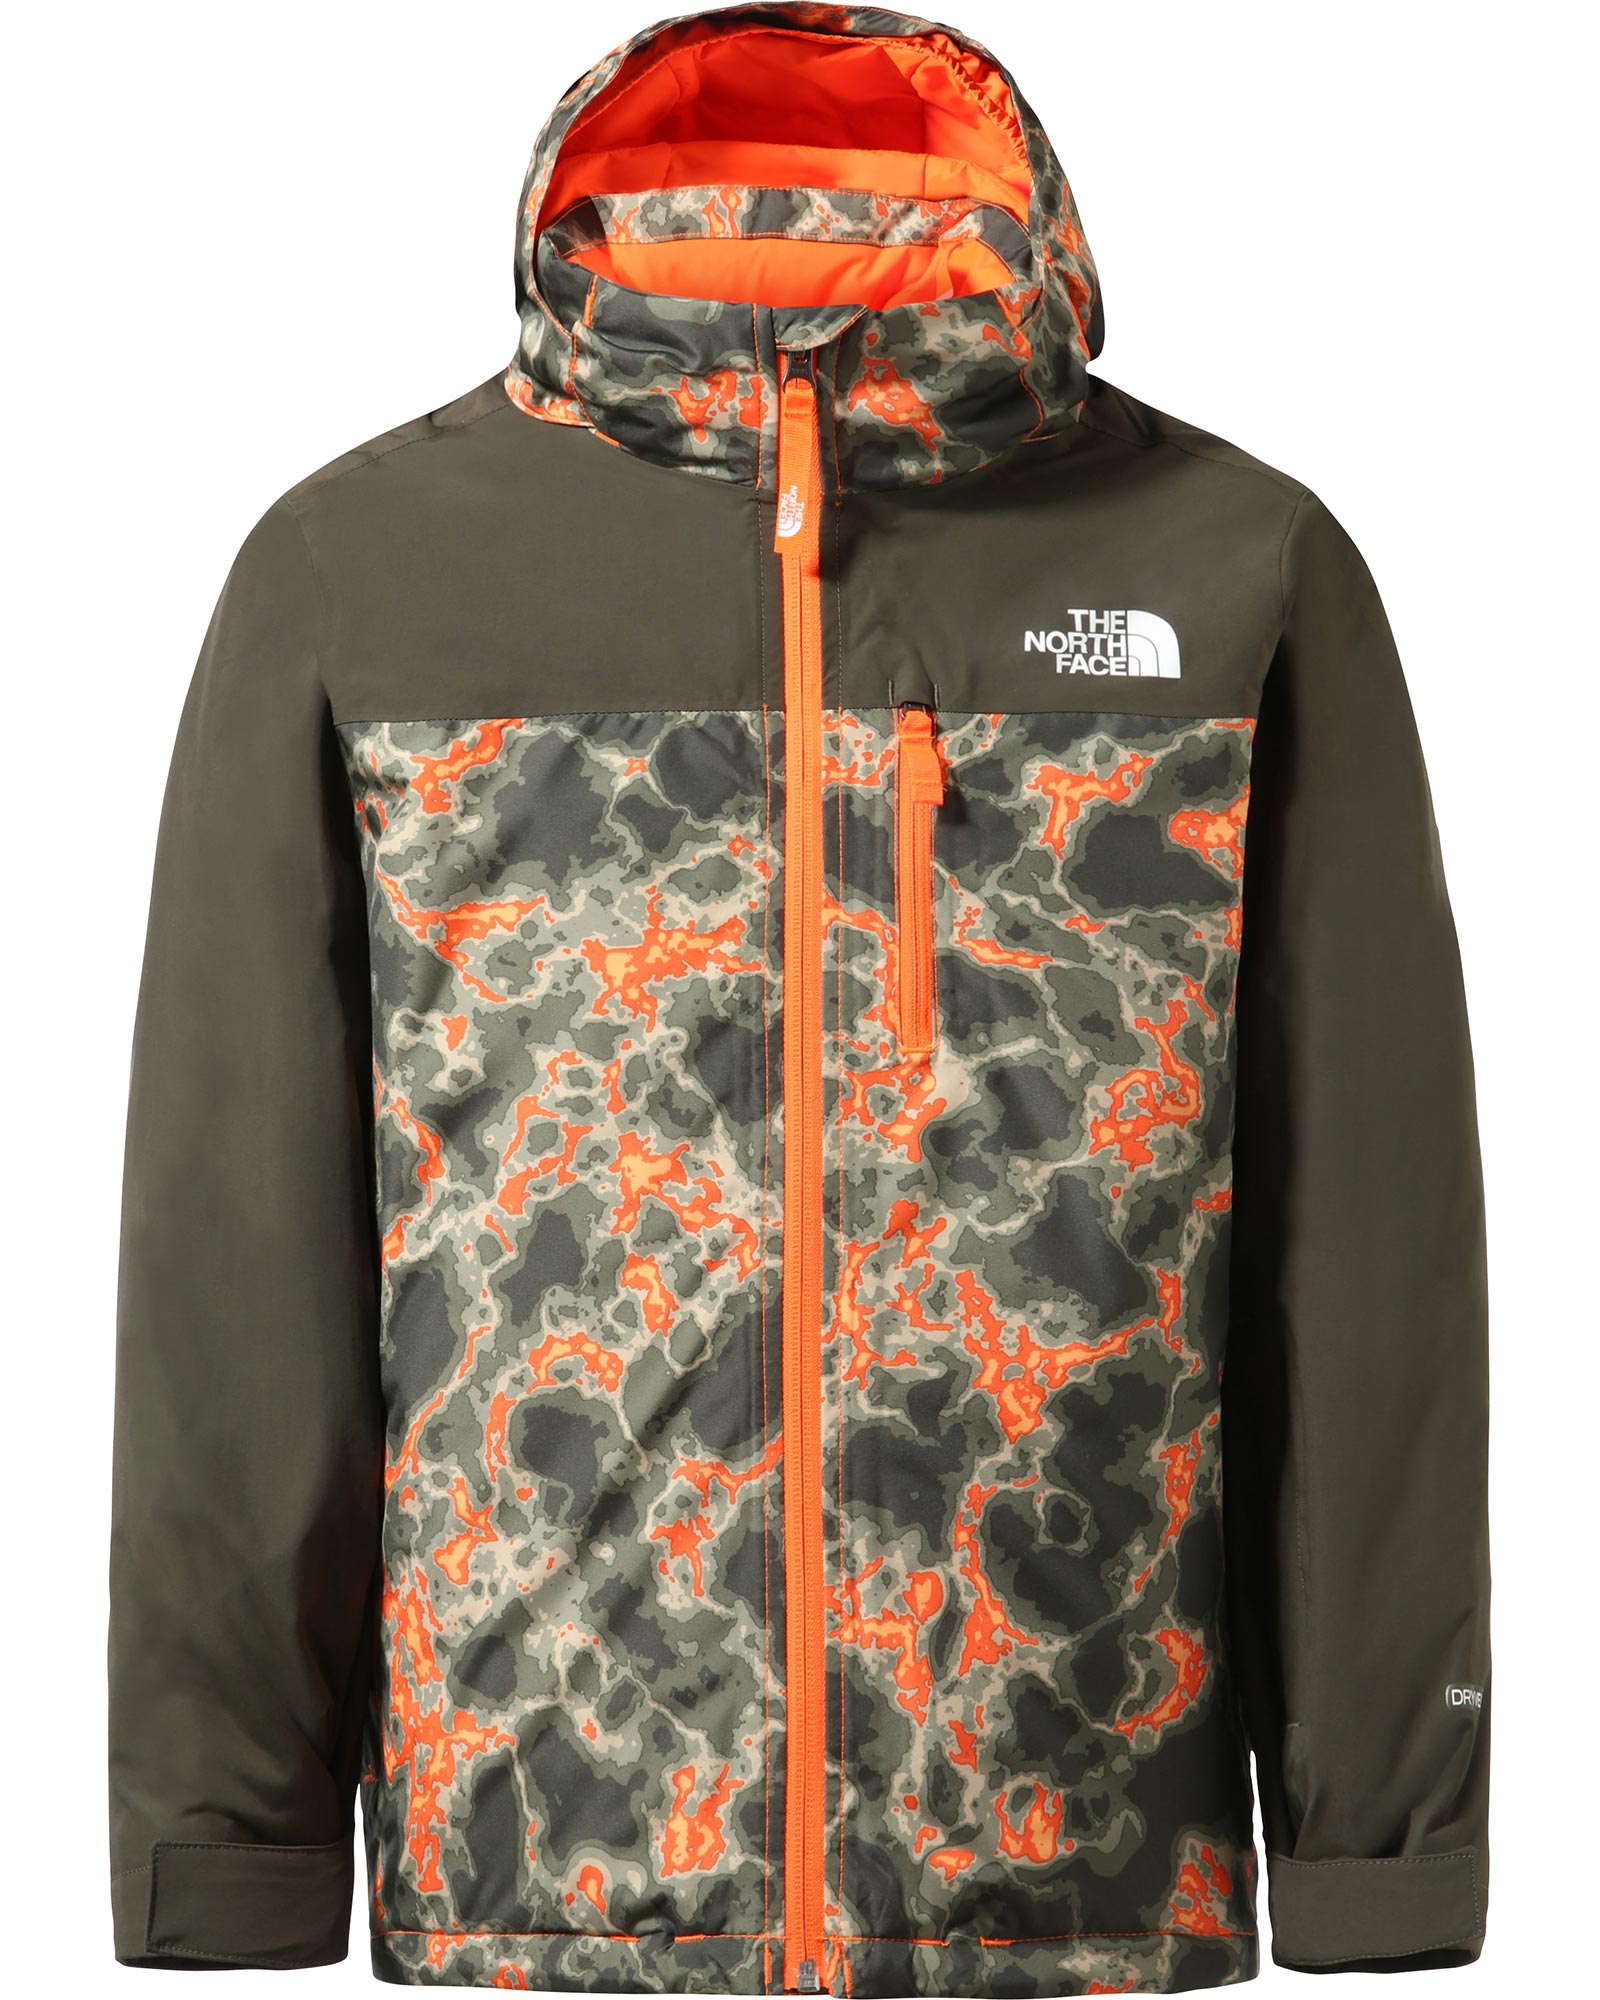 The North Face Snowquest Plus Kids Insulated Jacket